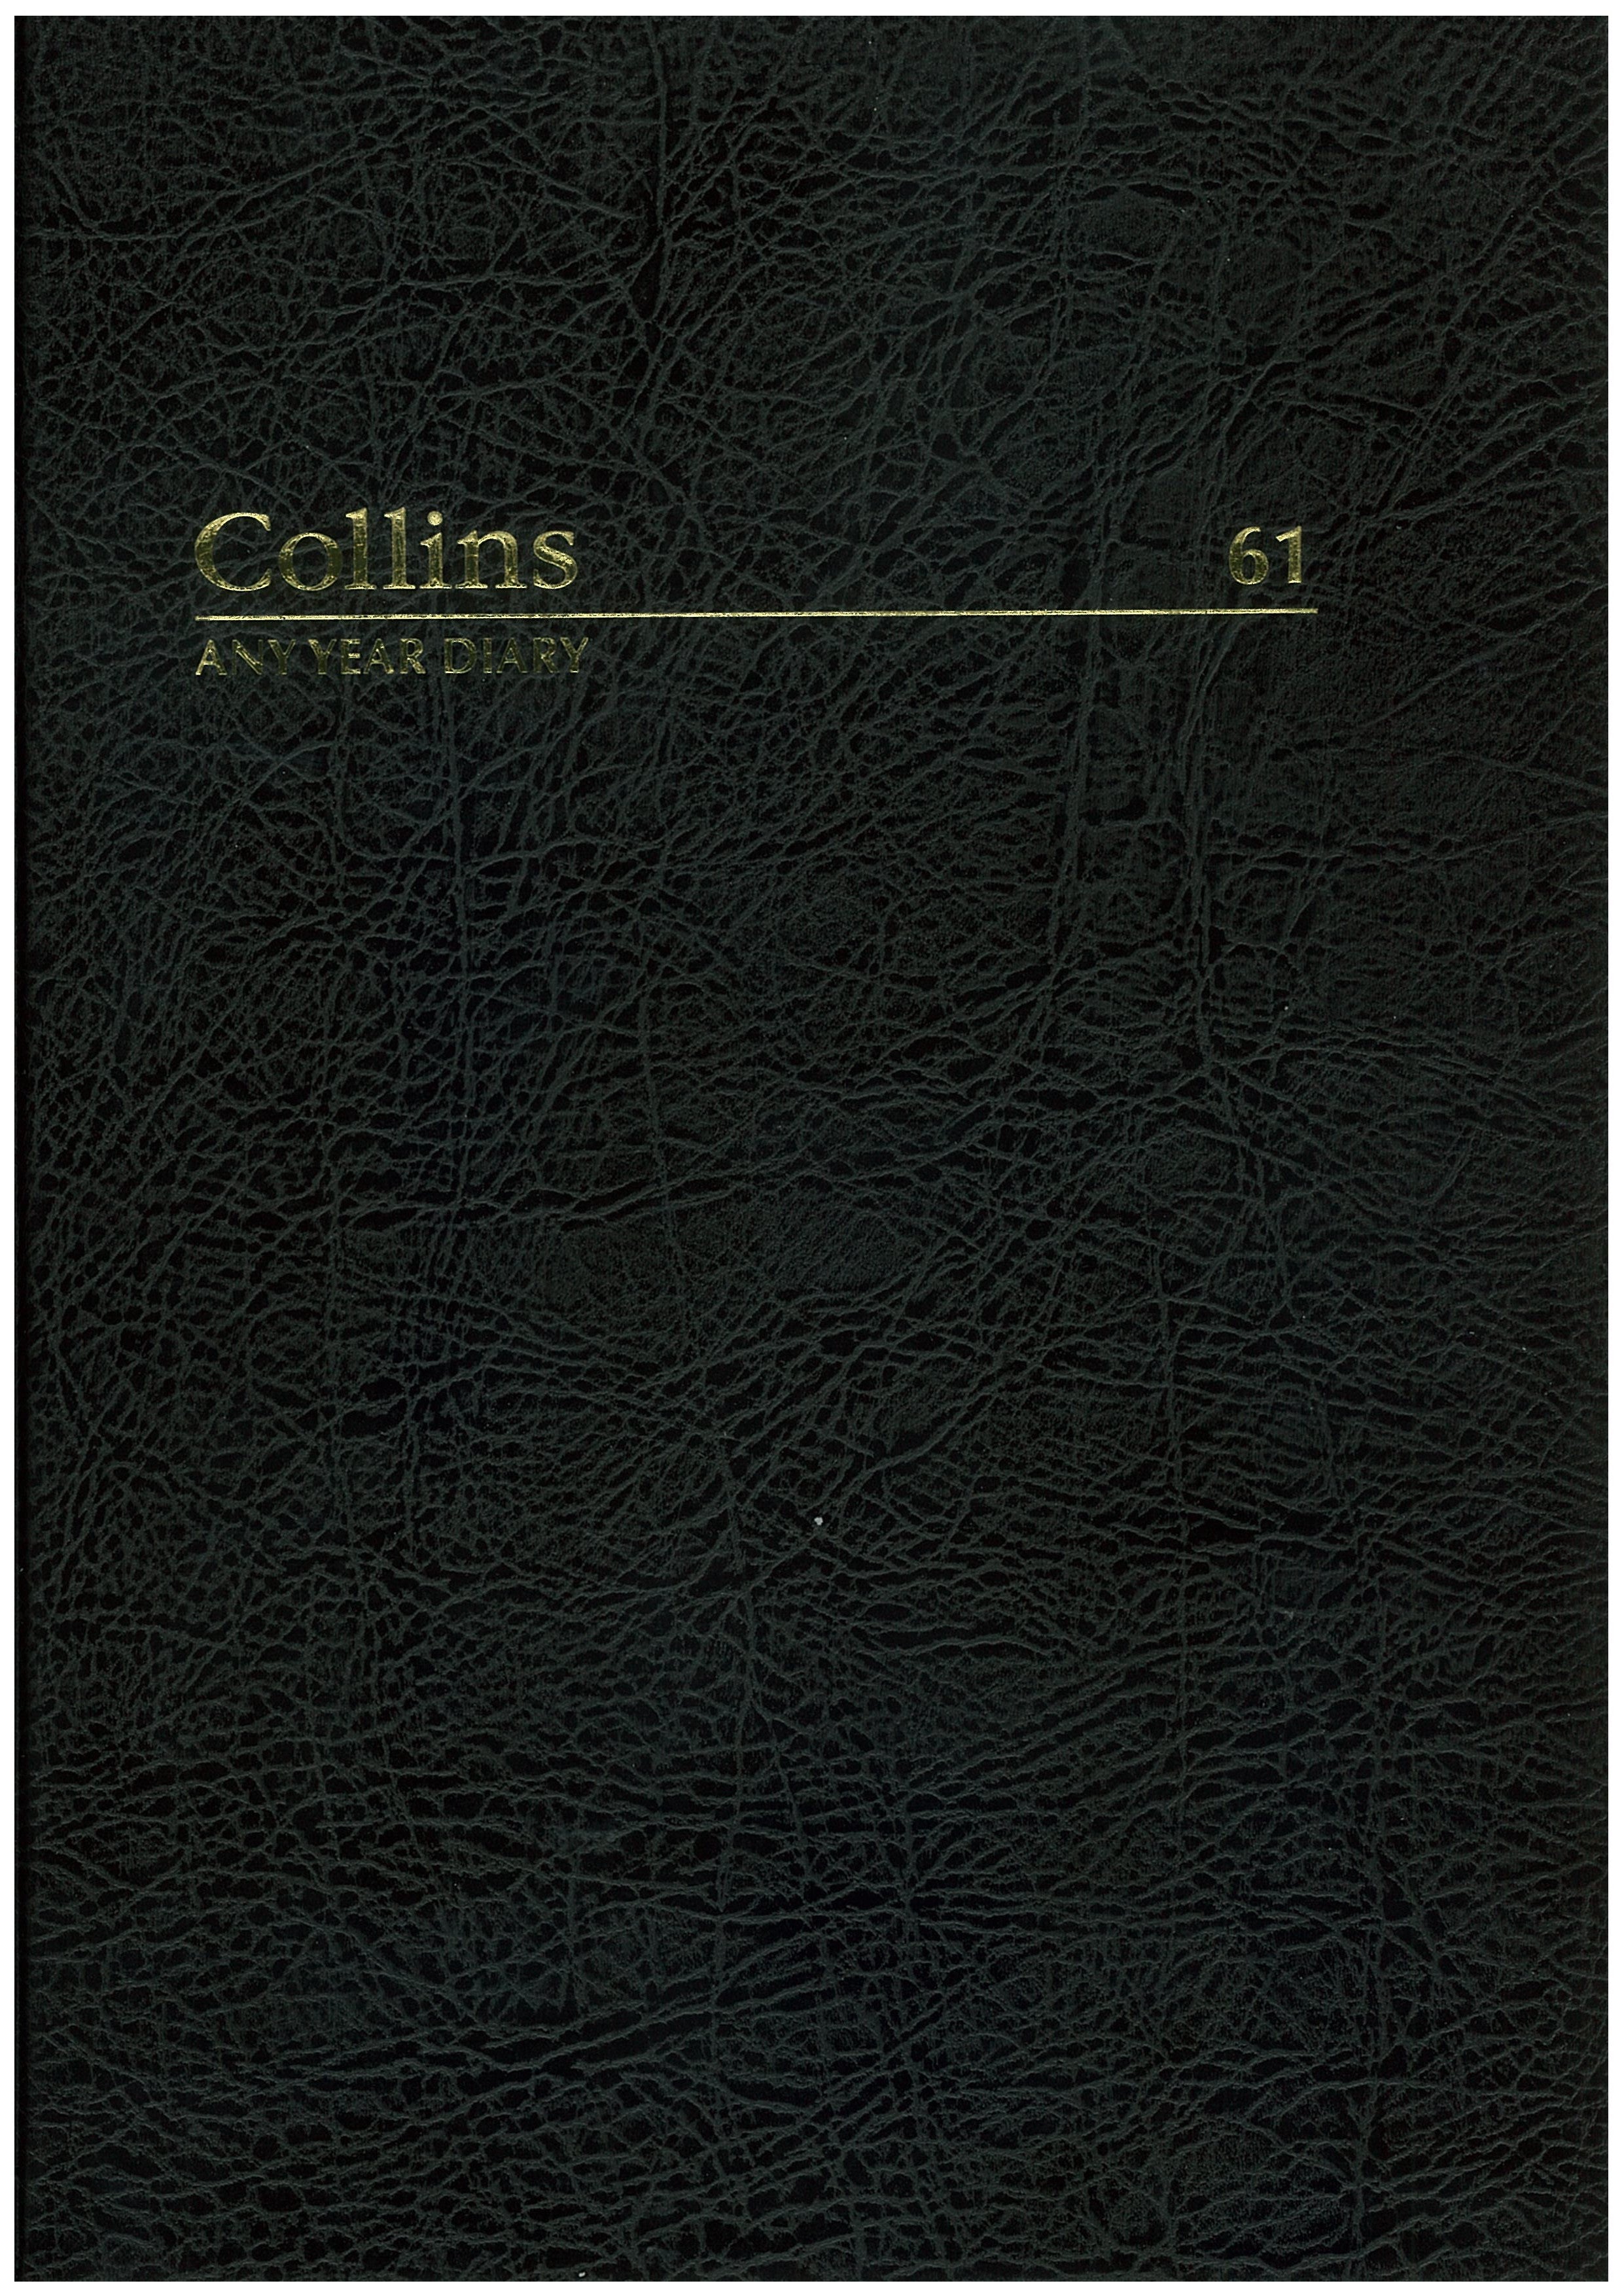 Any Year Diary A4 3 Days to a Page #61 - Collins Debden